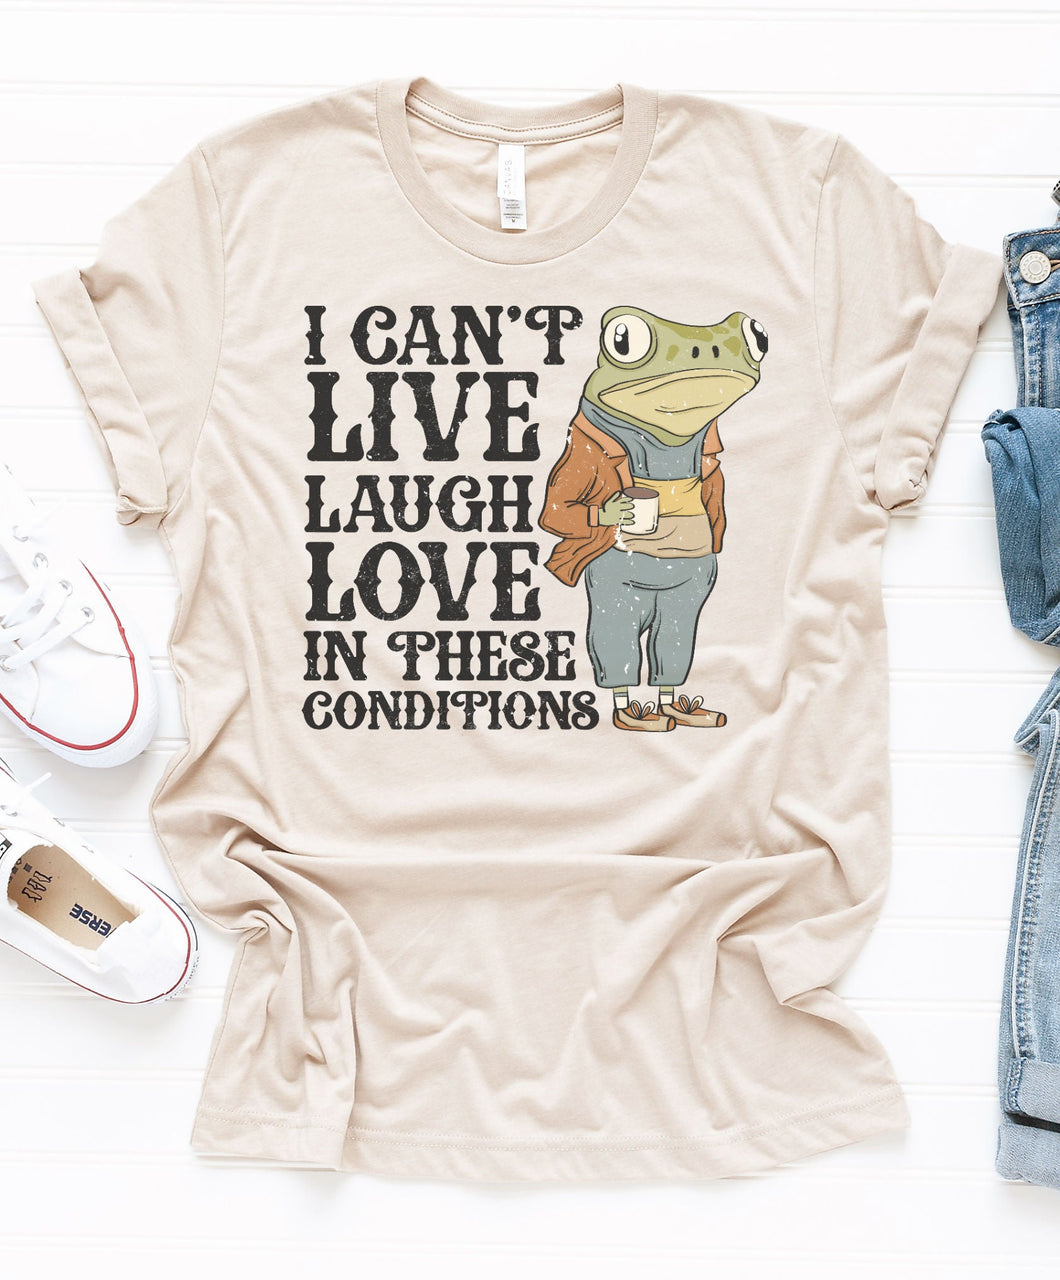 I Cant Live Love Laugh in these Conditions Graphic Tee